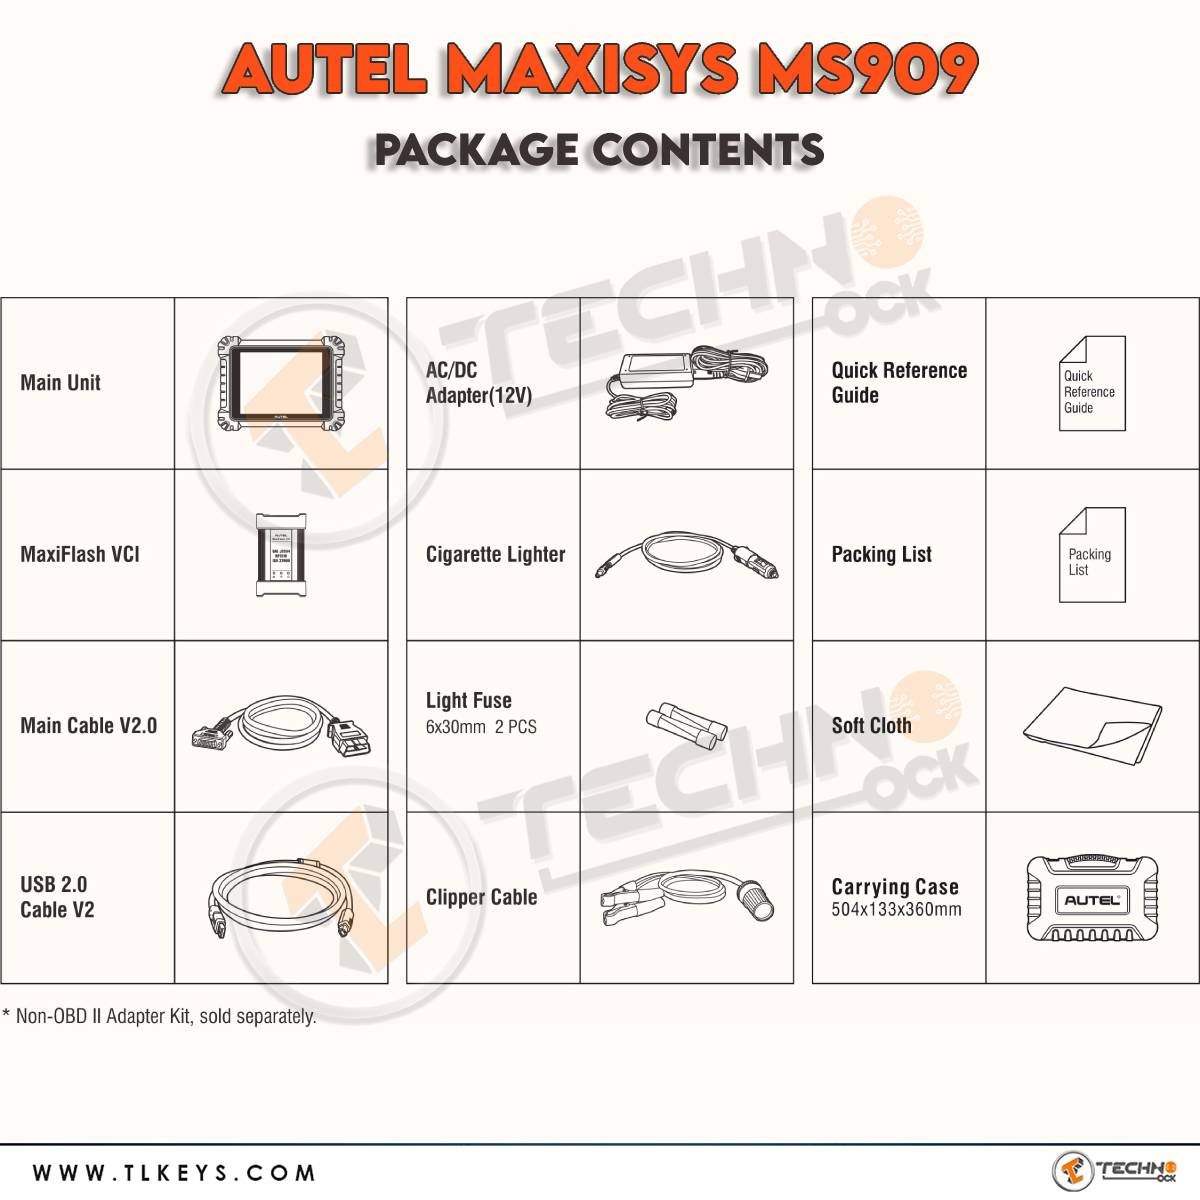 Autel MaxiSys MS909 Package Contents